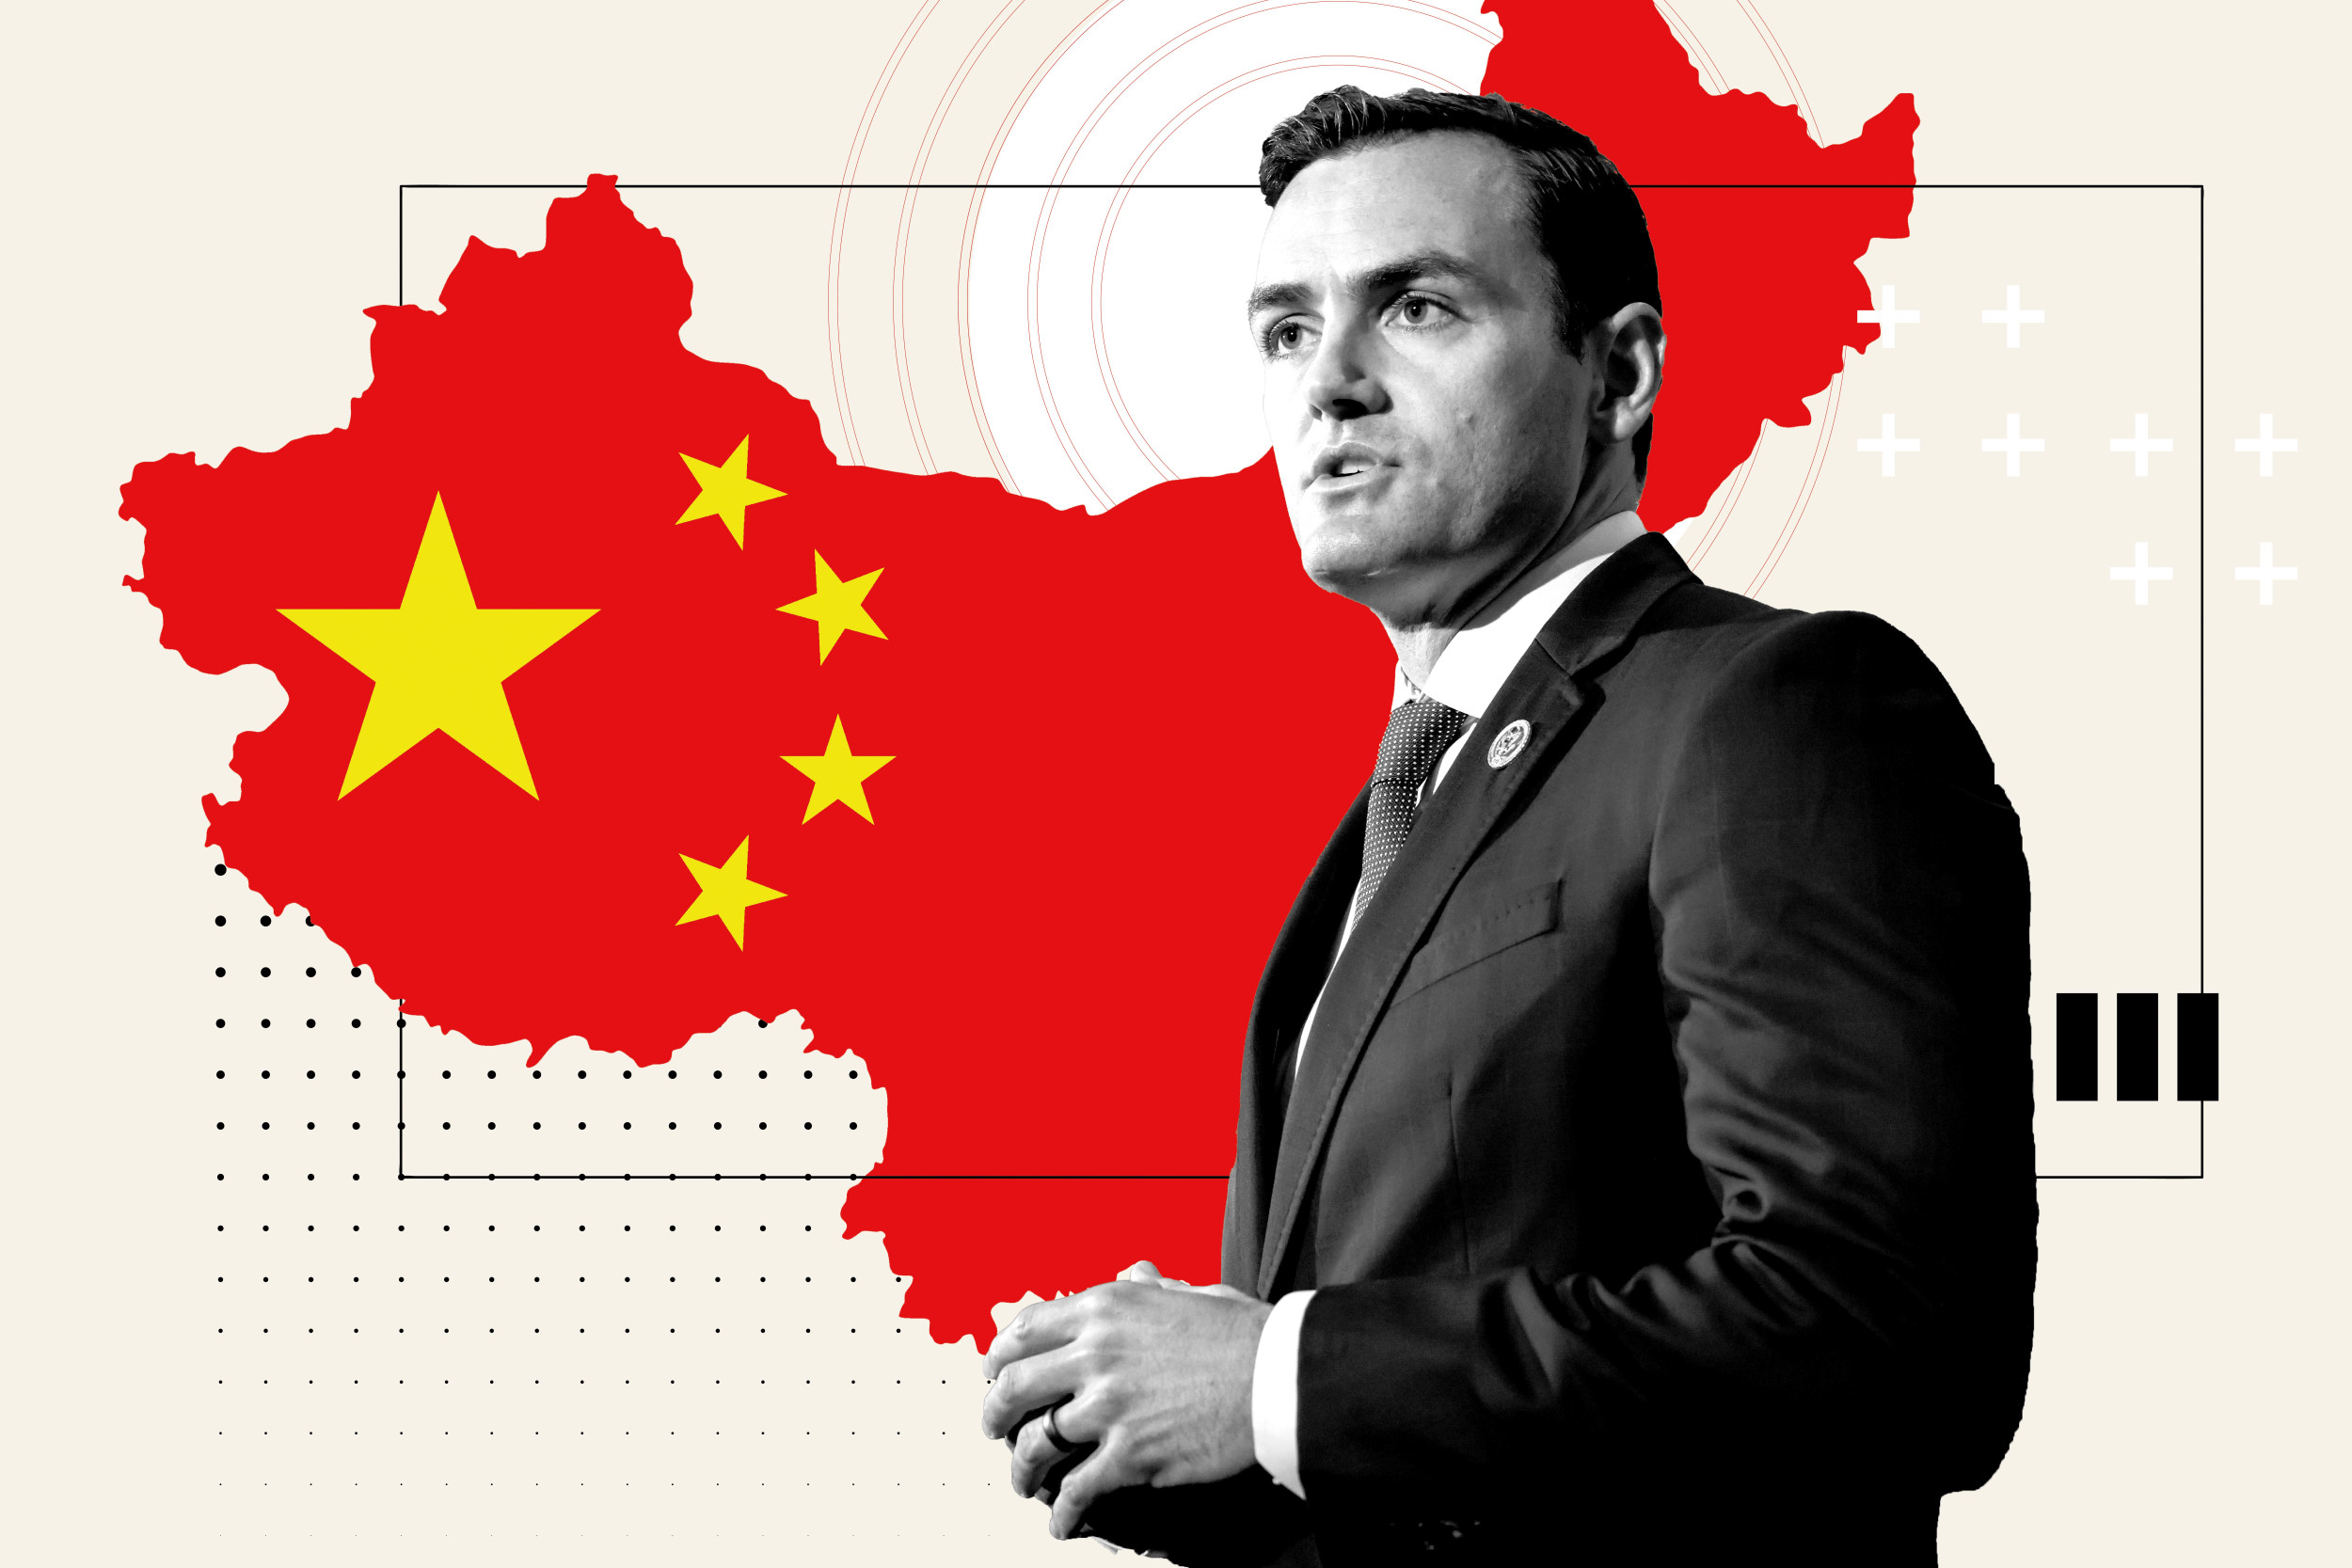 How to Confront China